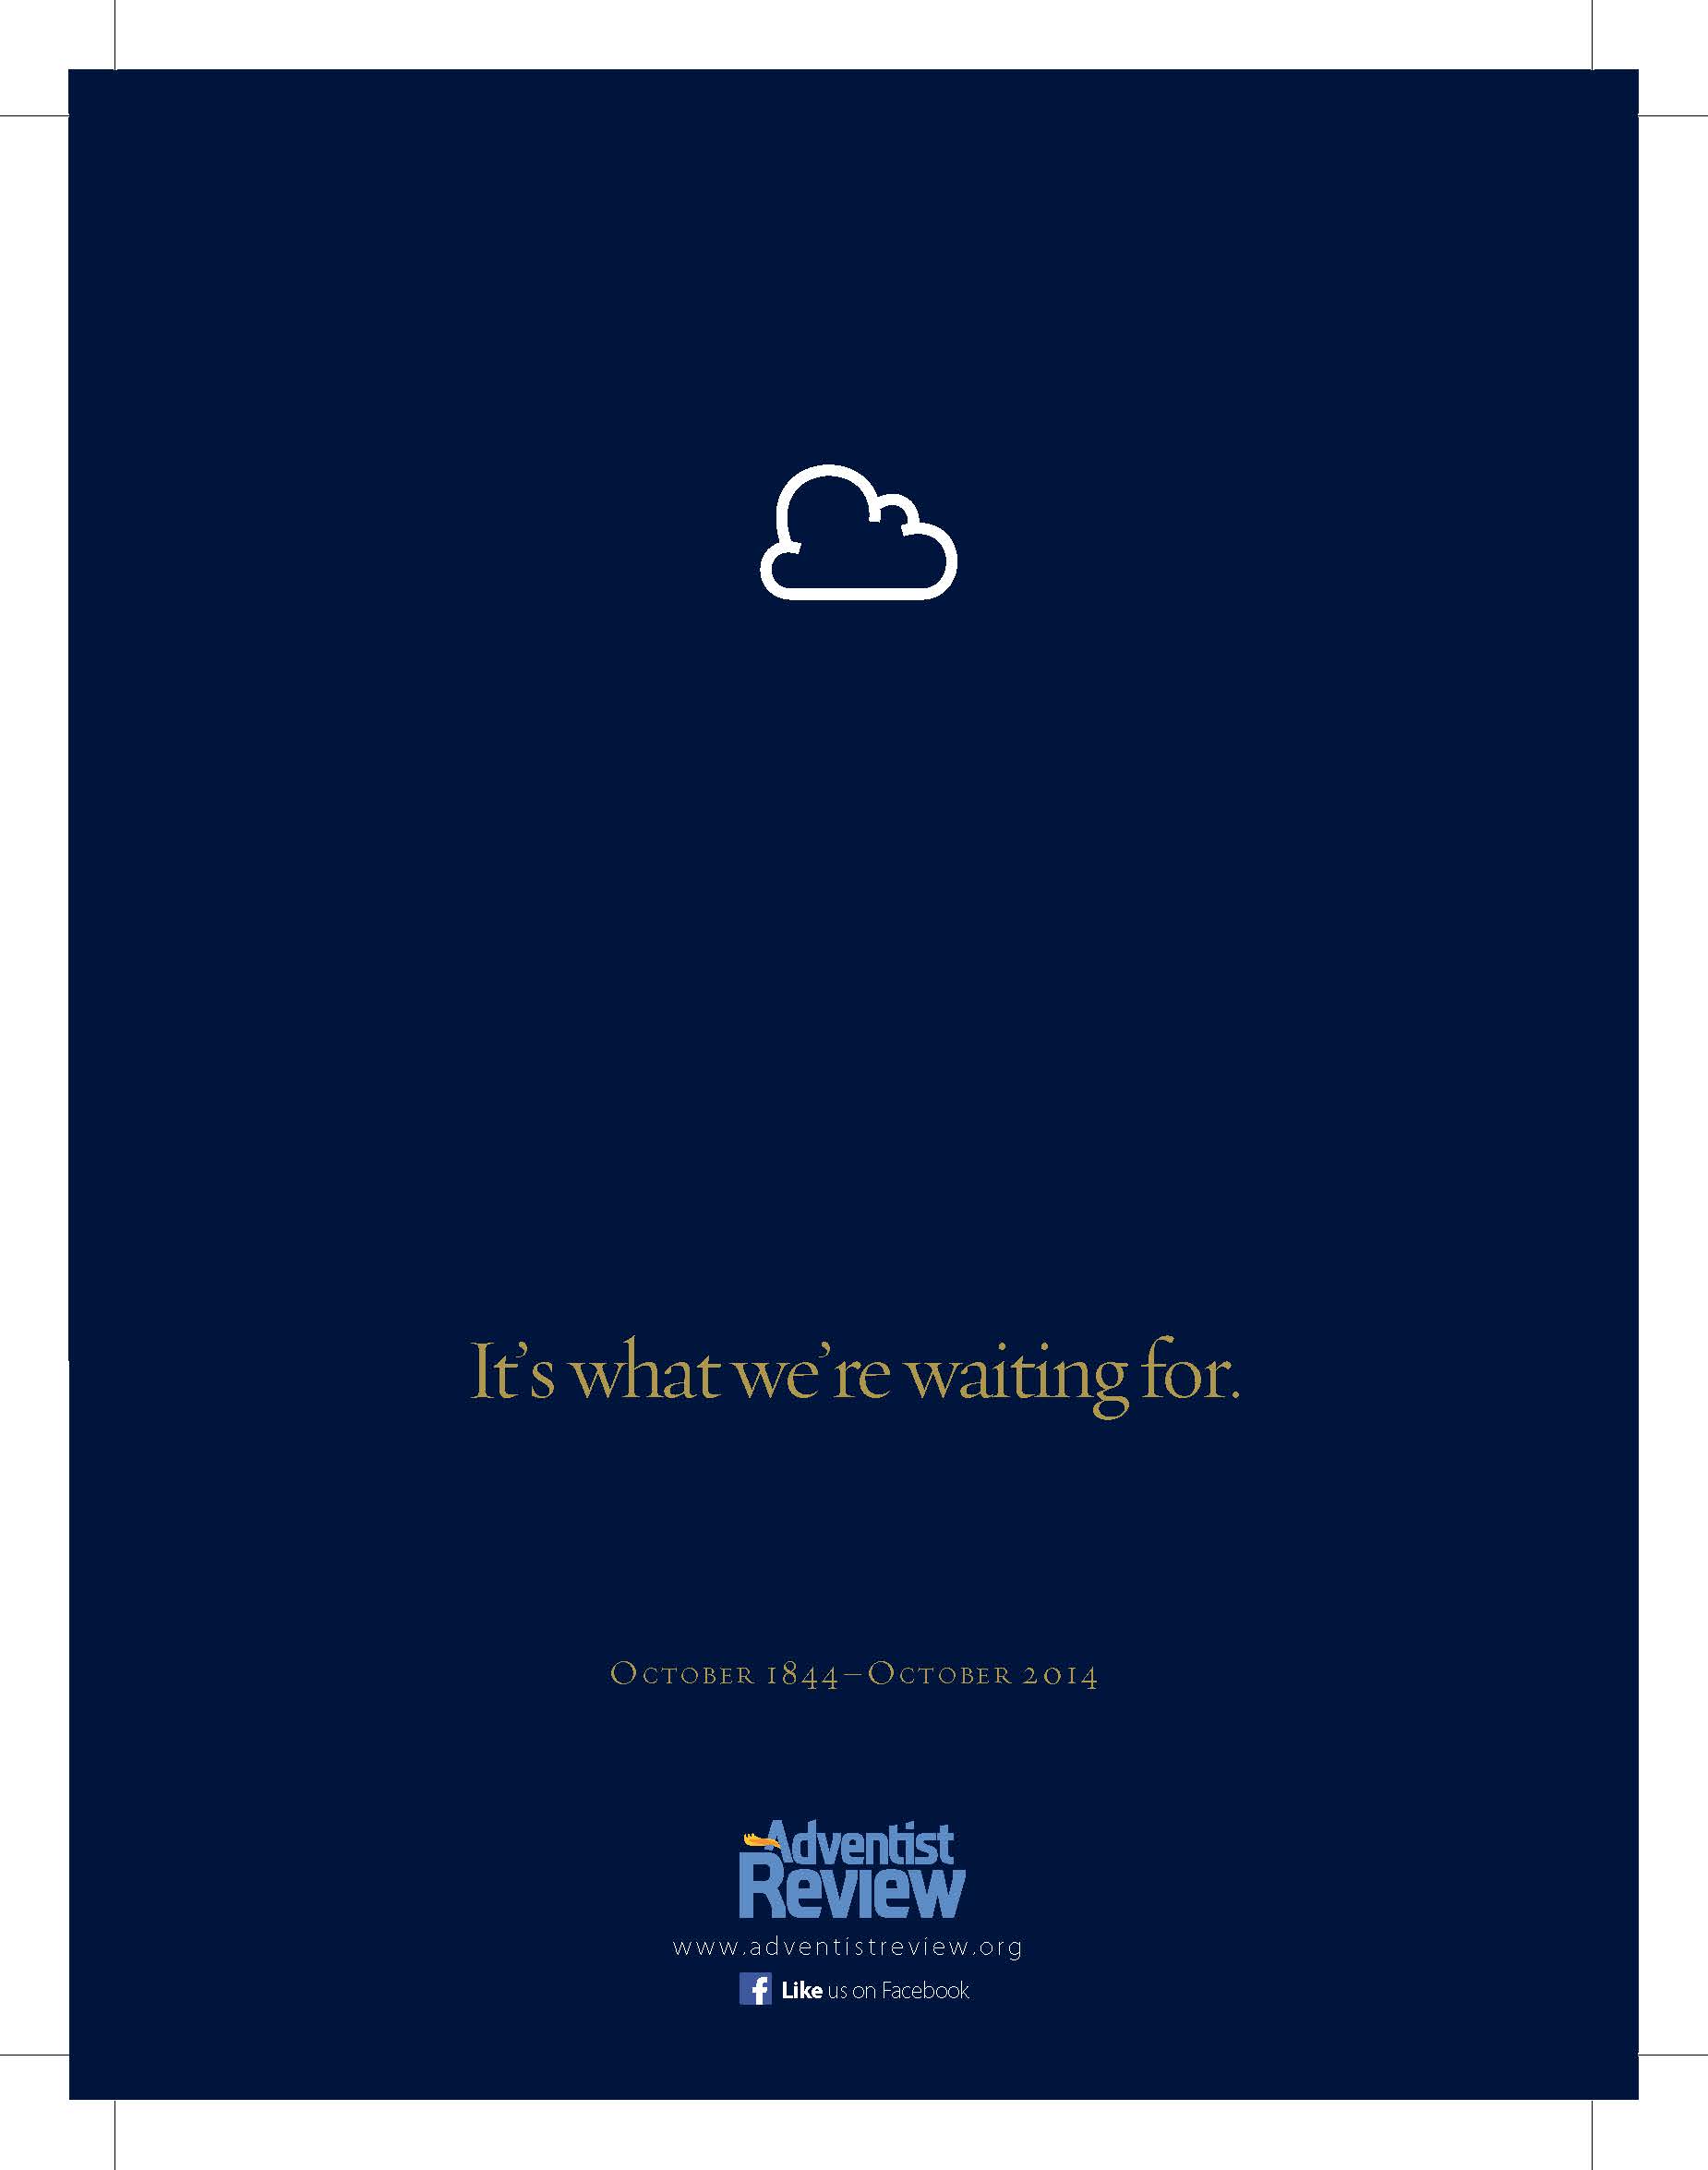 One of the award-winning print advertisements in the category "General Excellence: Best in Class: Marketing: Public Relations/Marketing Campaign." The ad reads, "It's what we've been waiting for," and has the dates, October 1844-October 2014.